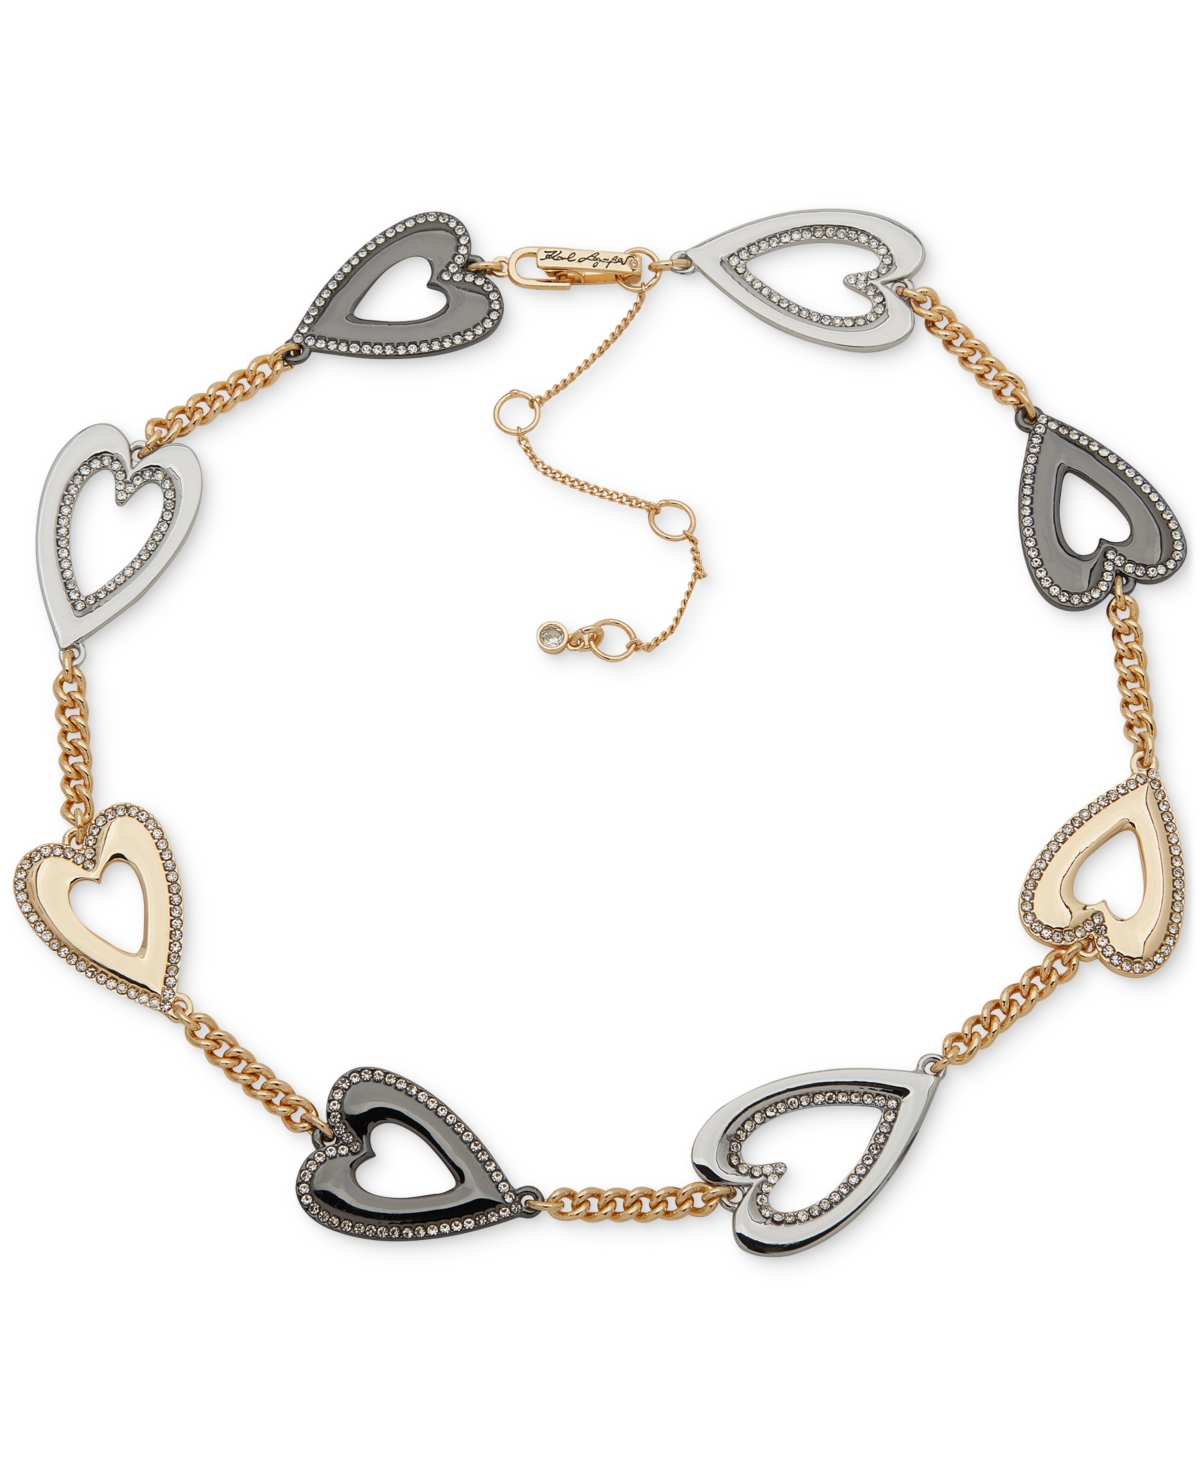 Karl Lagerfeld Tri-tone Pave Heart Collar Necklace, 16" + 3" Extender In Crystal